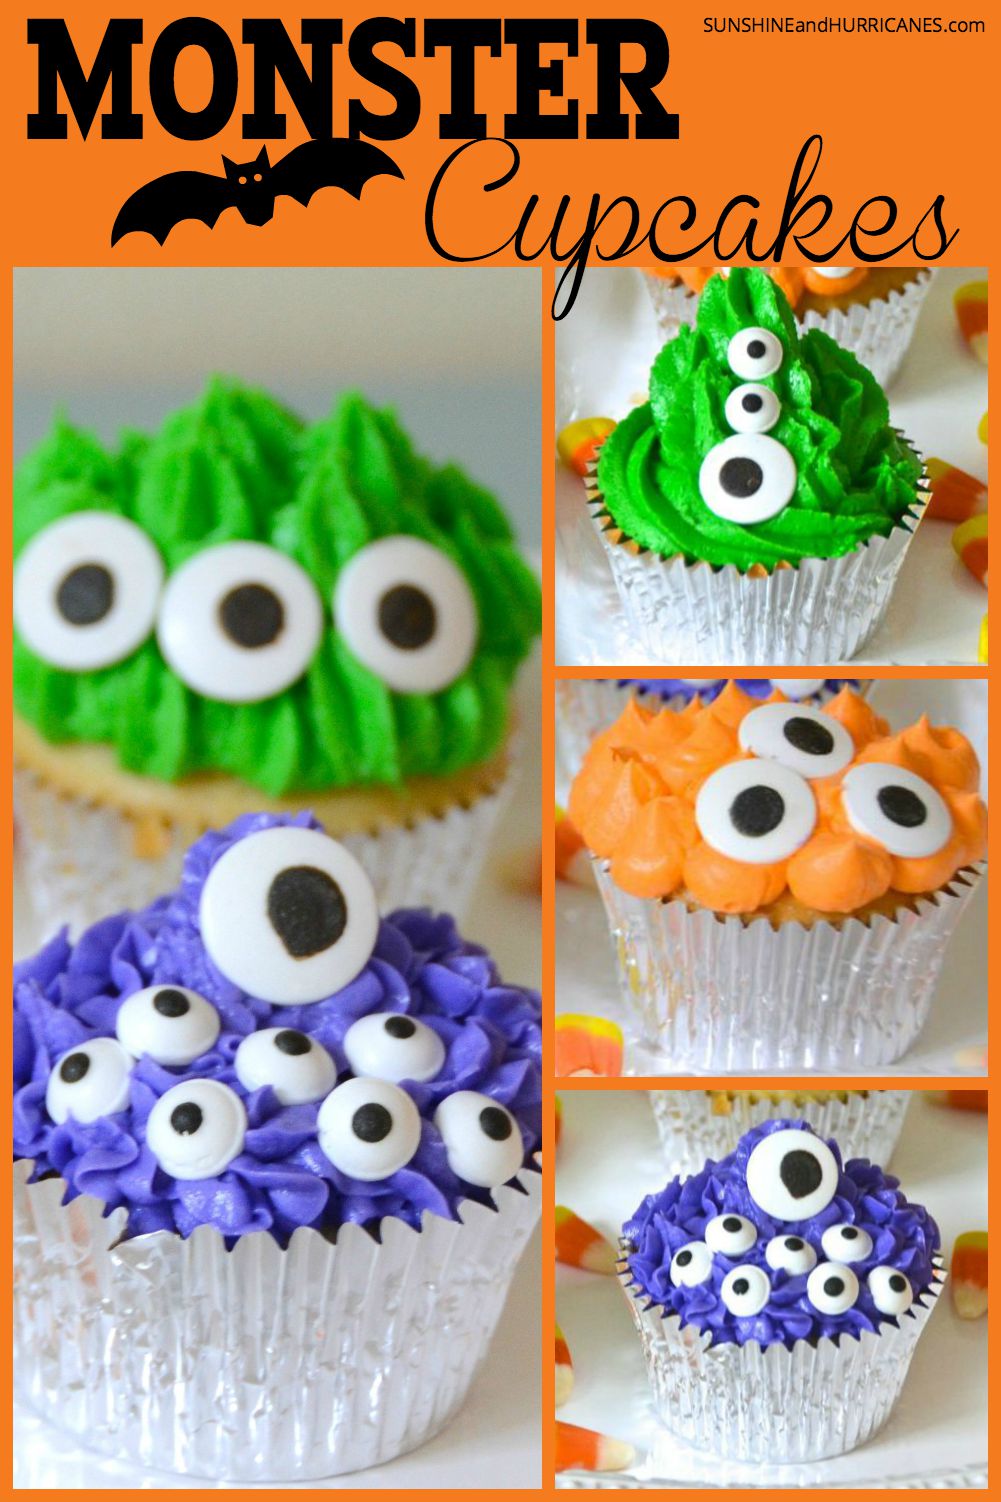 These adorable monster Halloween cupcakes are easy to make and fun for kids to customize. A great treat for a Halloween party, a school Halloween party or a fall festival. Monster Halloween Cupcakes. SunshineandHurricanes.com